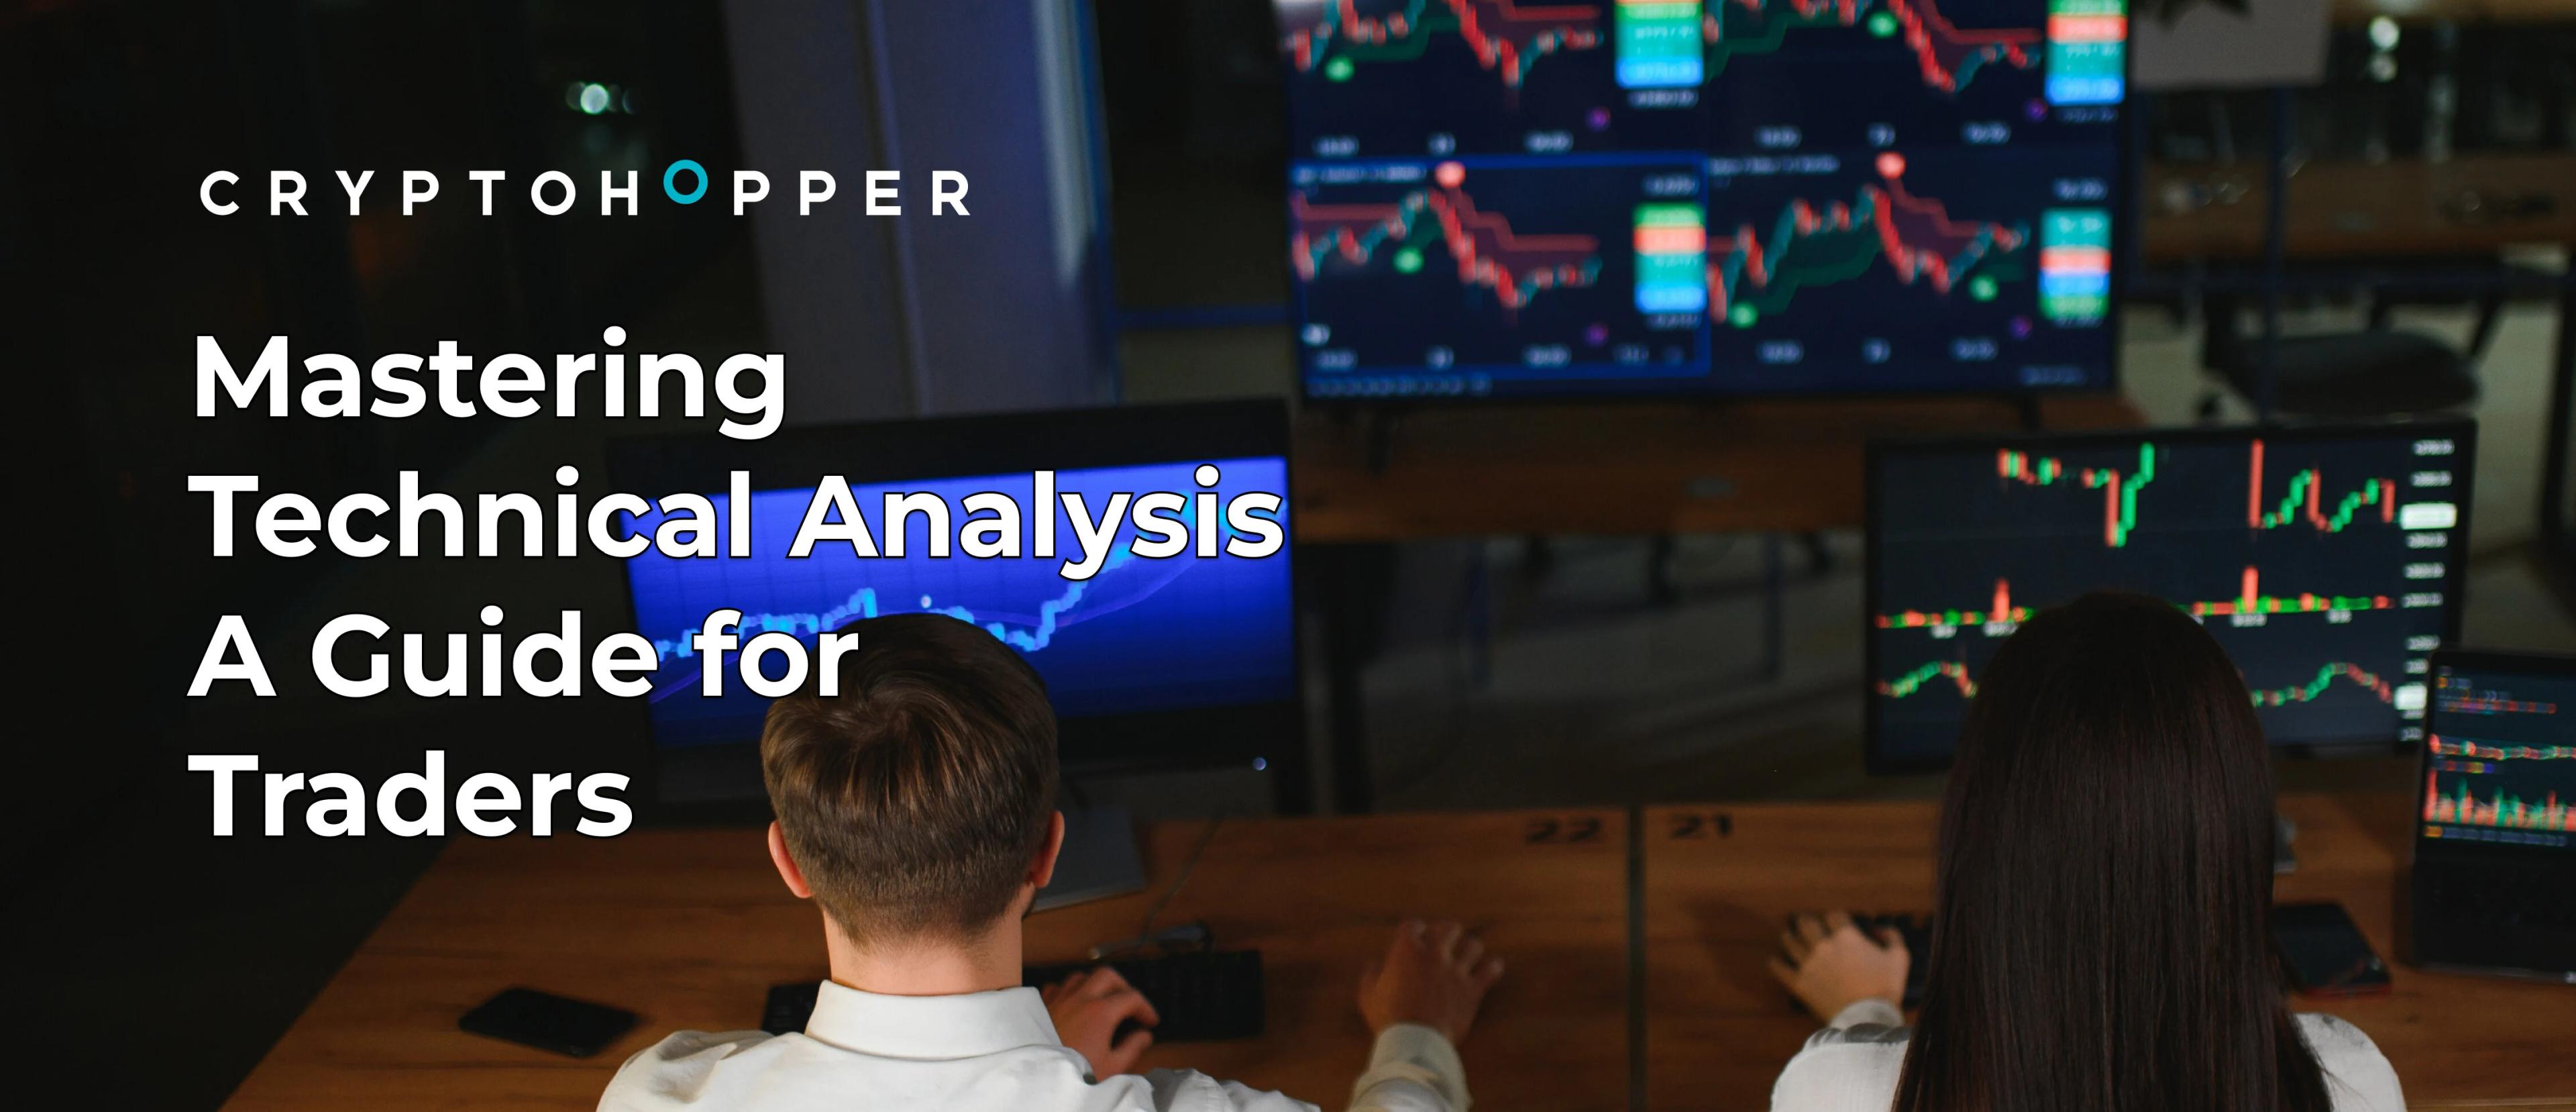 Mastering Technical Analysis: A Guide for Traders